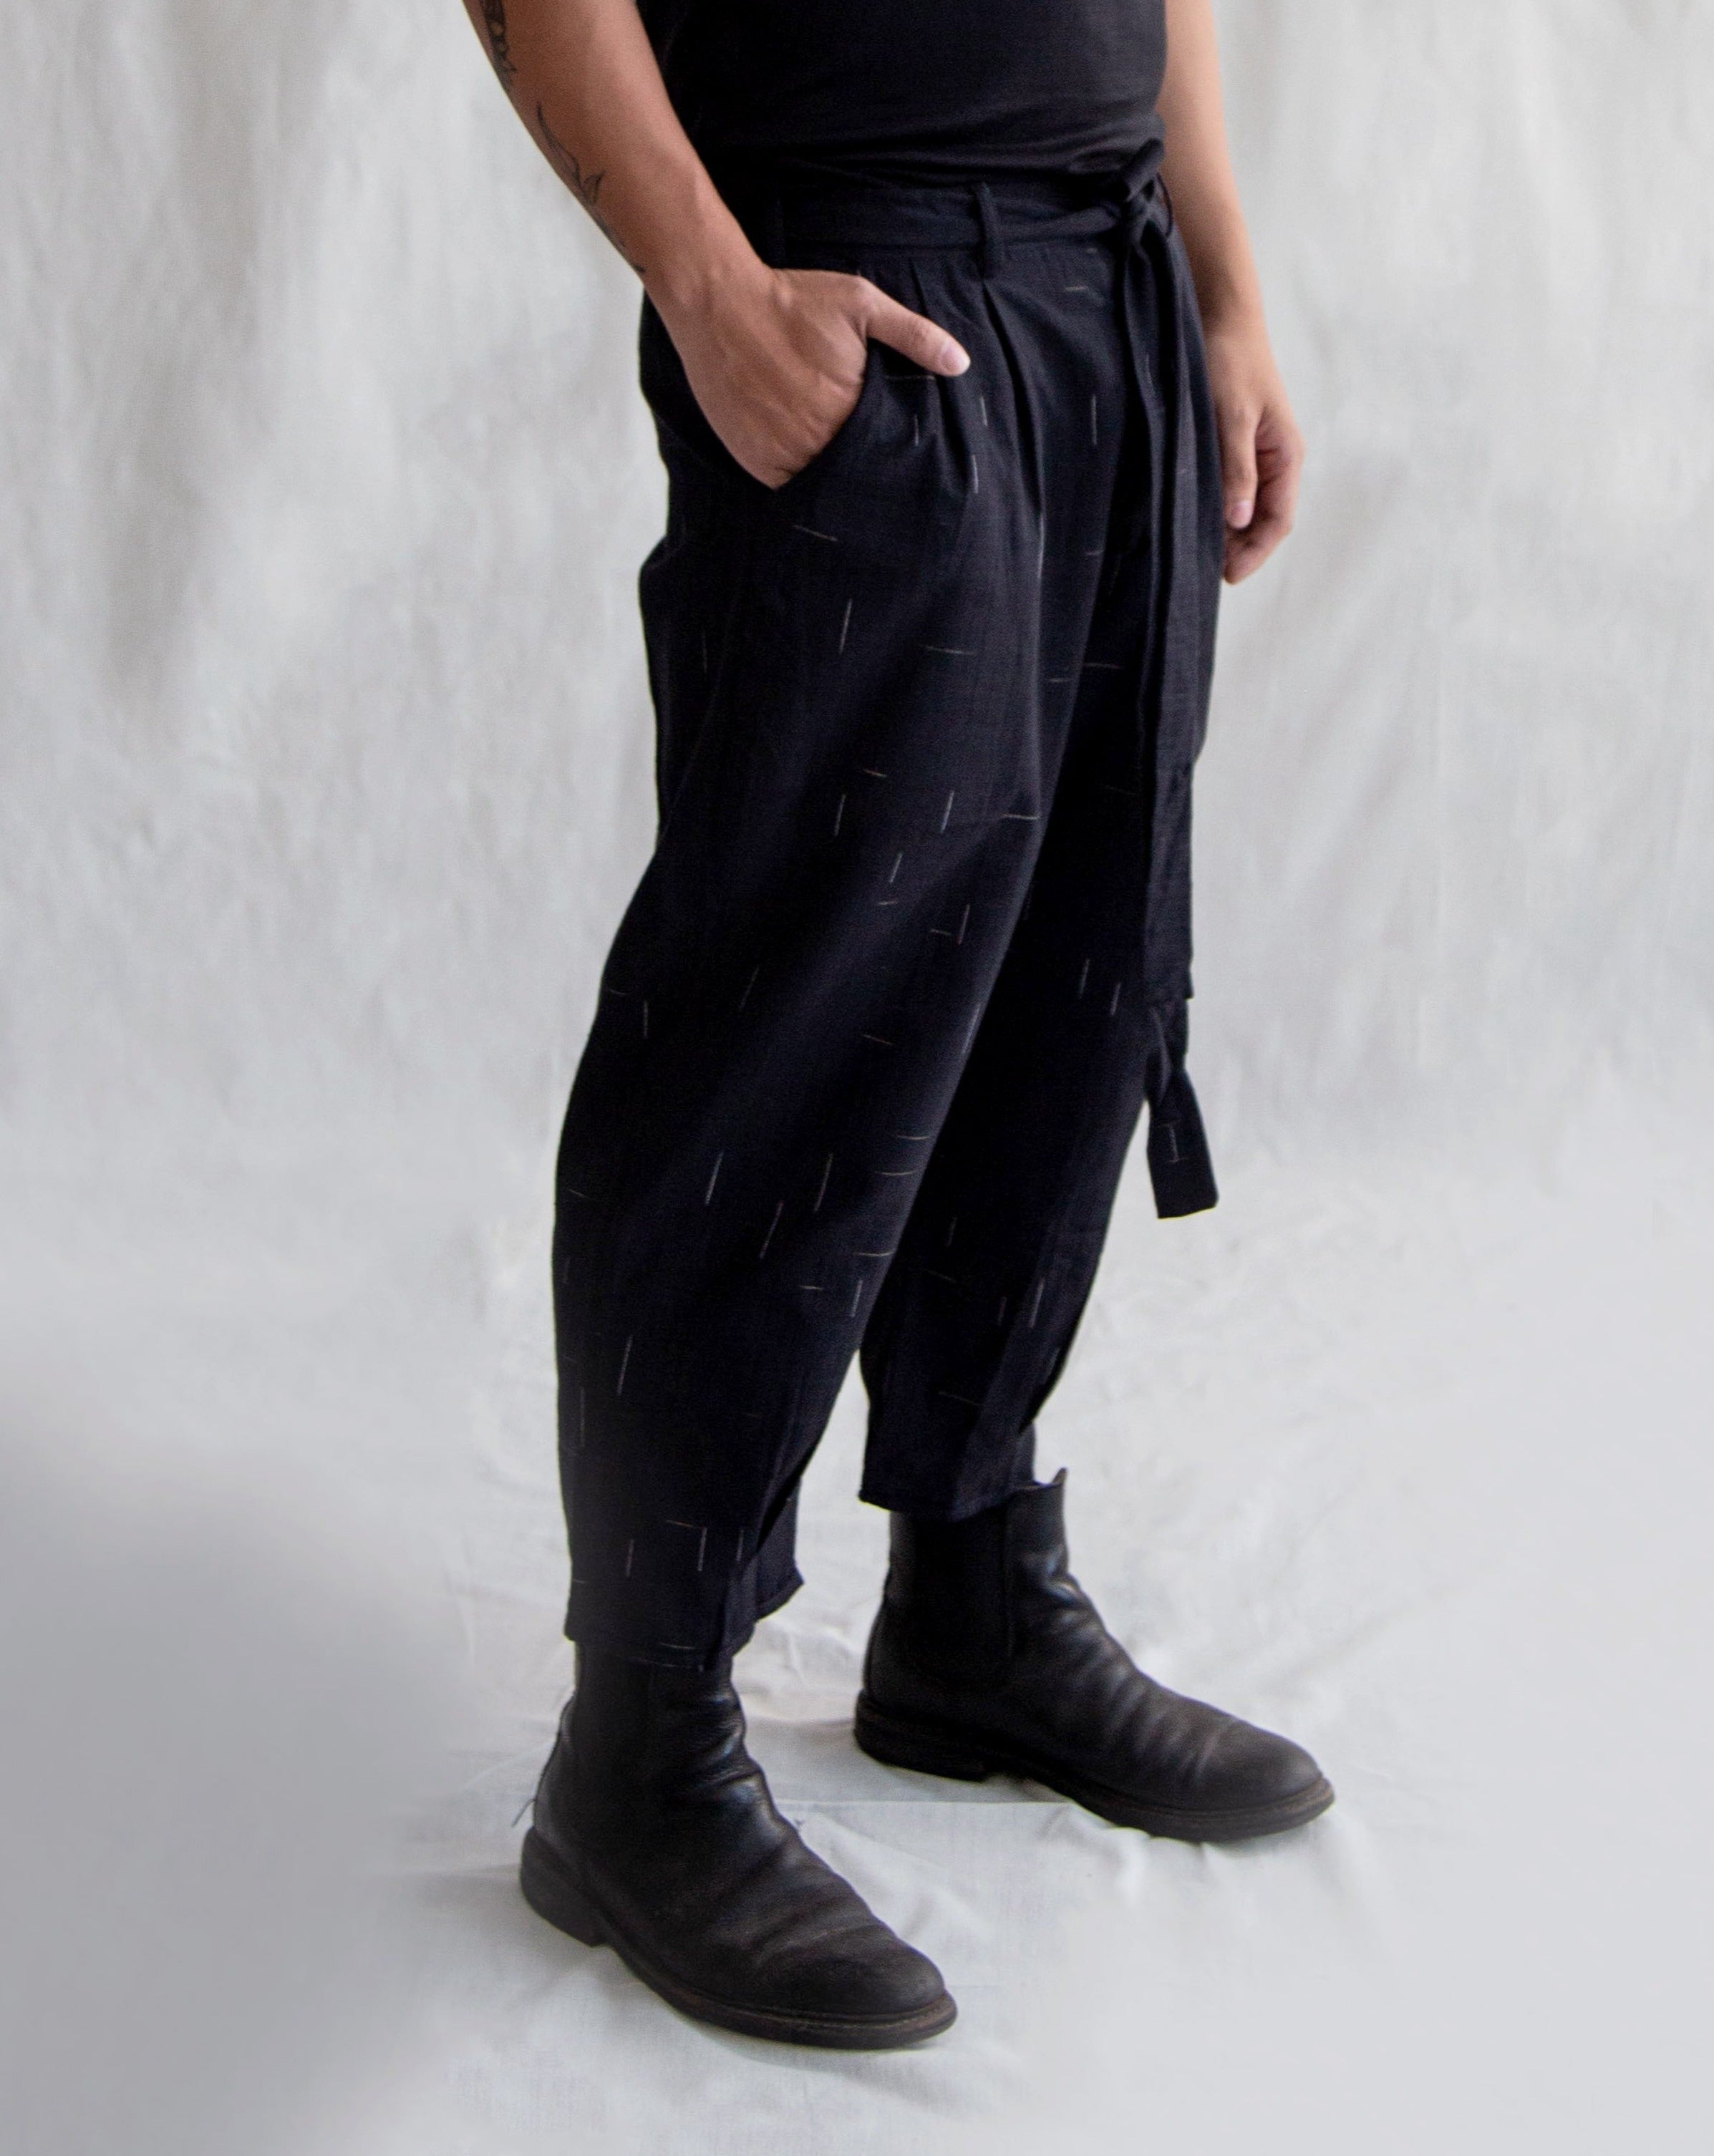 pants, gender neutral, bottoms, handcrafted pants